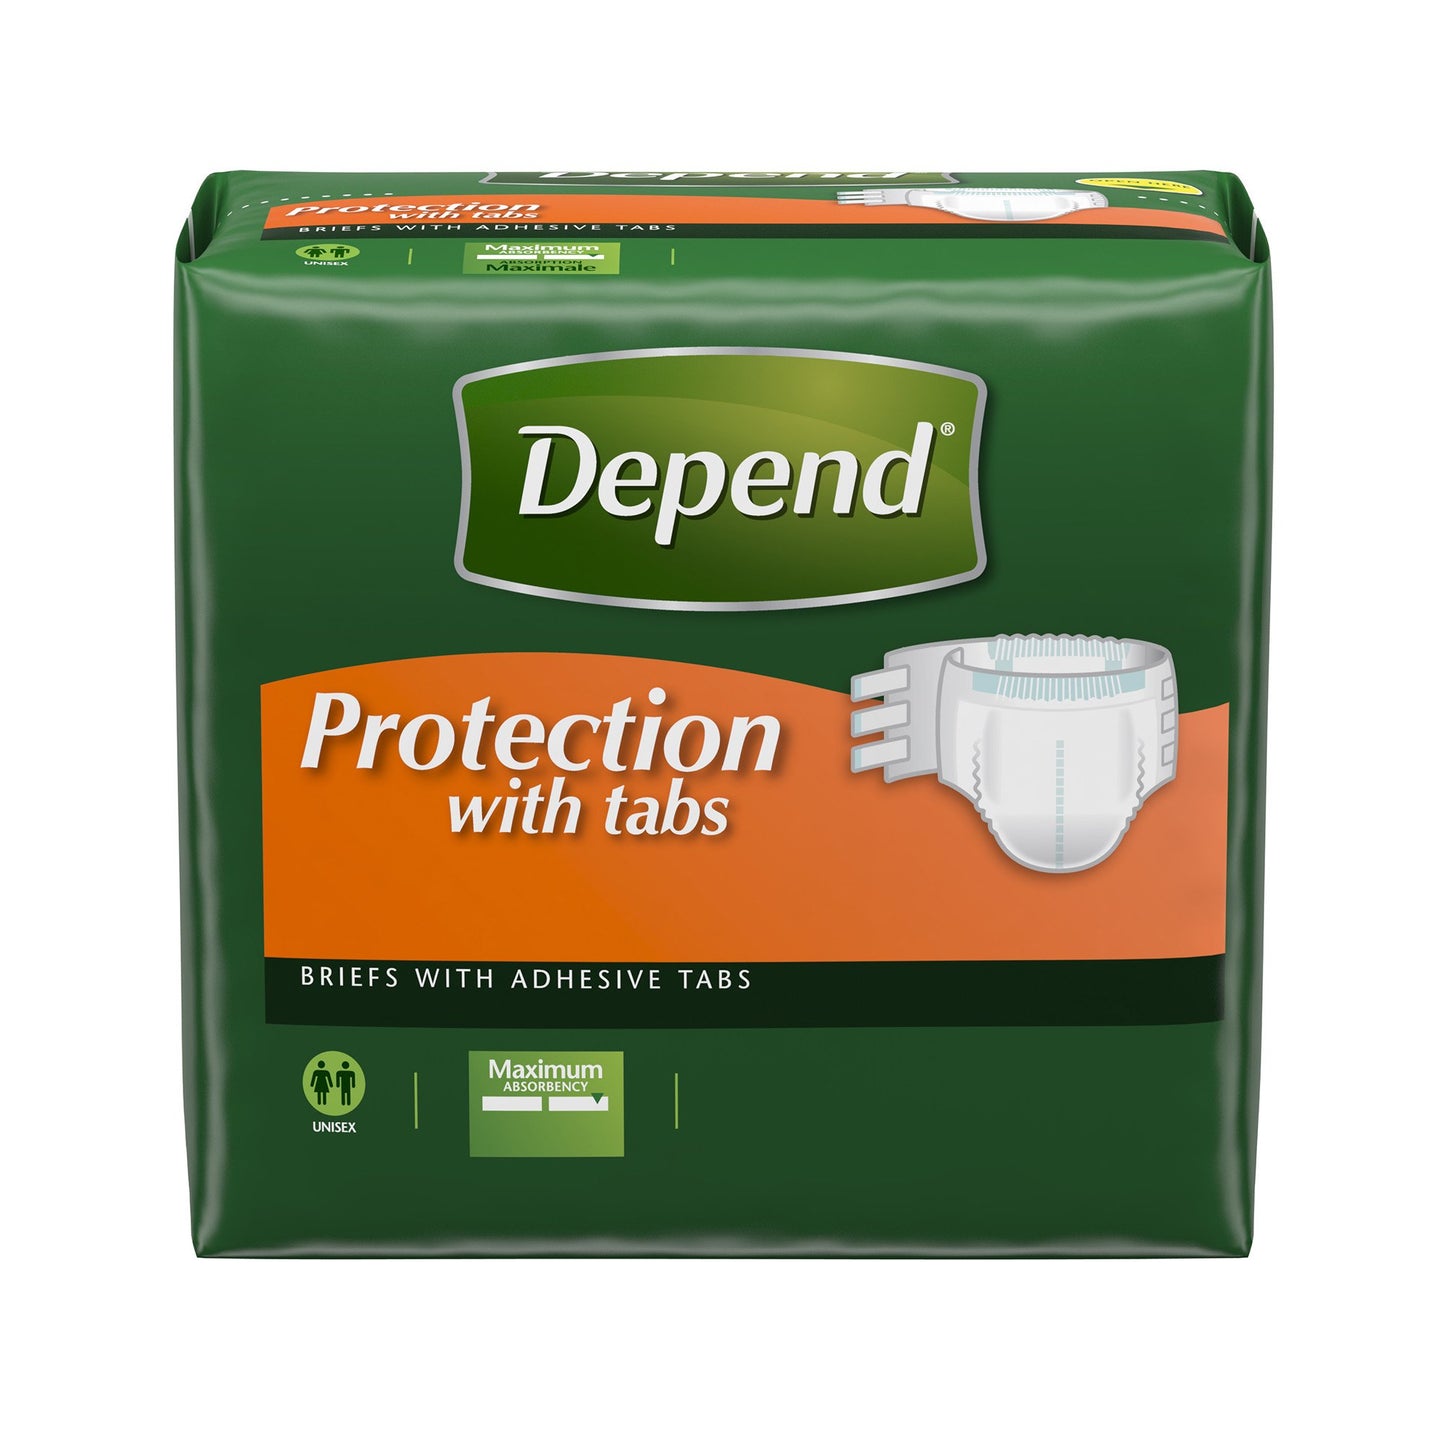 Depend® Maximum Incontinence Brief, Large, 16 ct